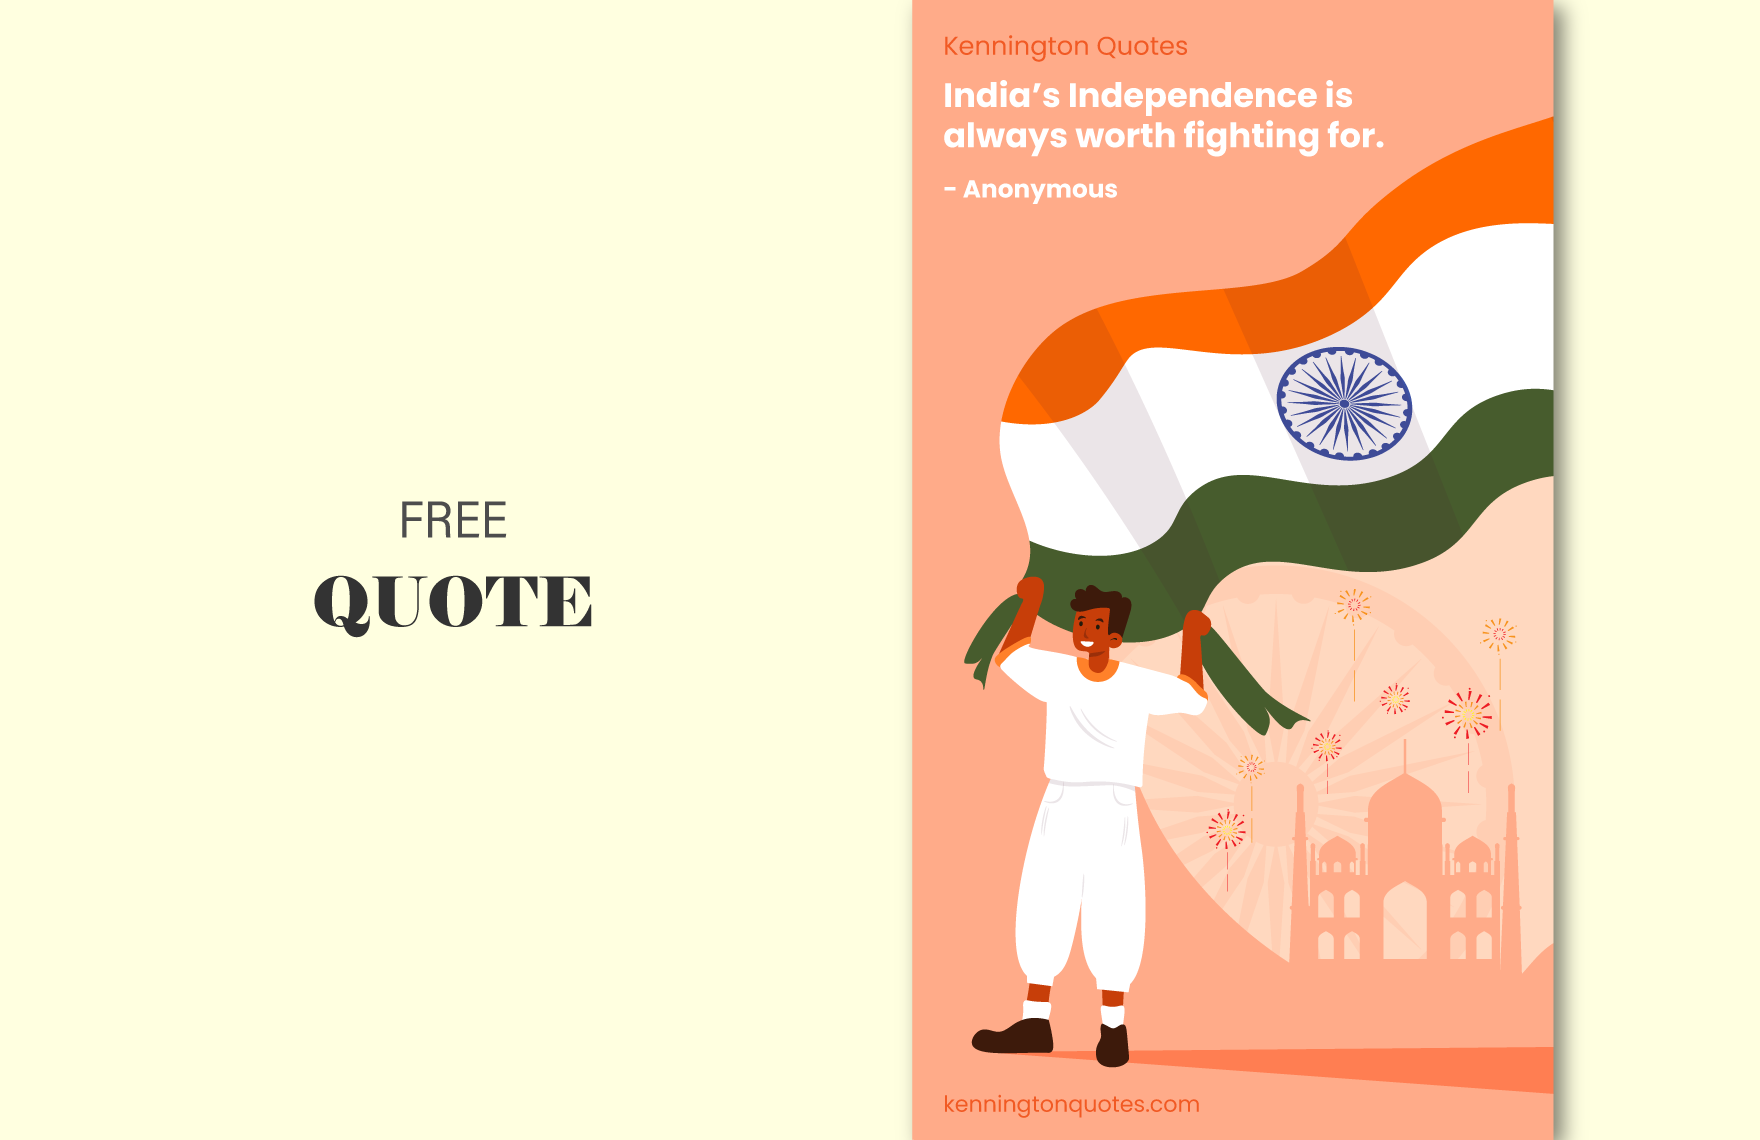 Free India Independence Day Quote in PDF, Illustrator, SVG, JPG